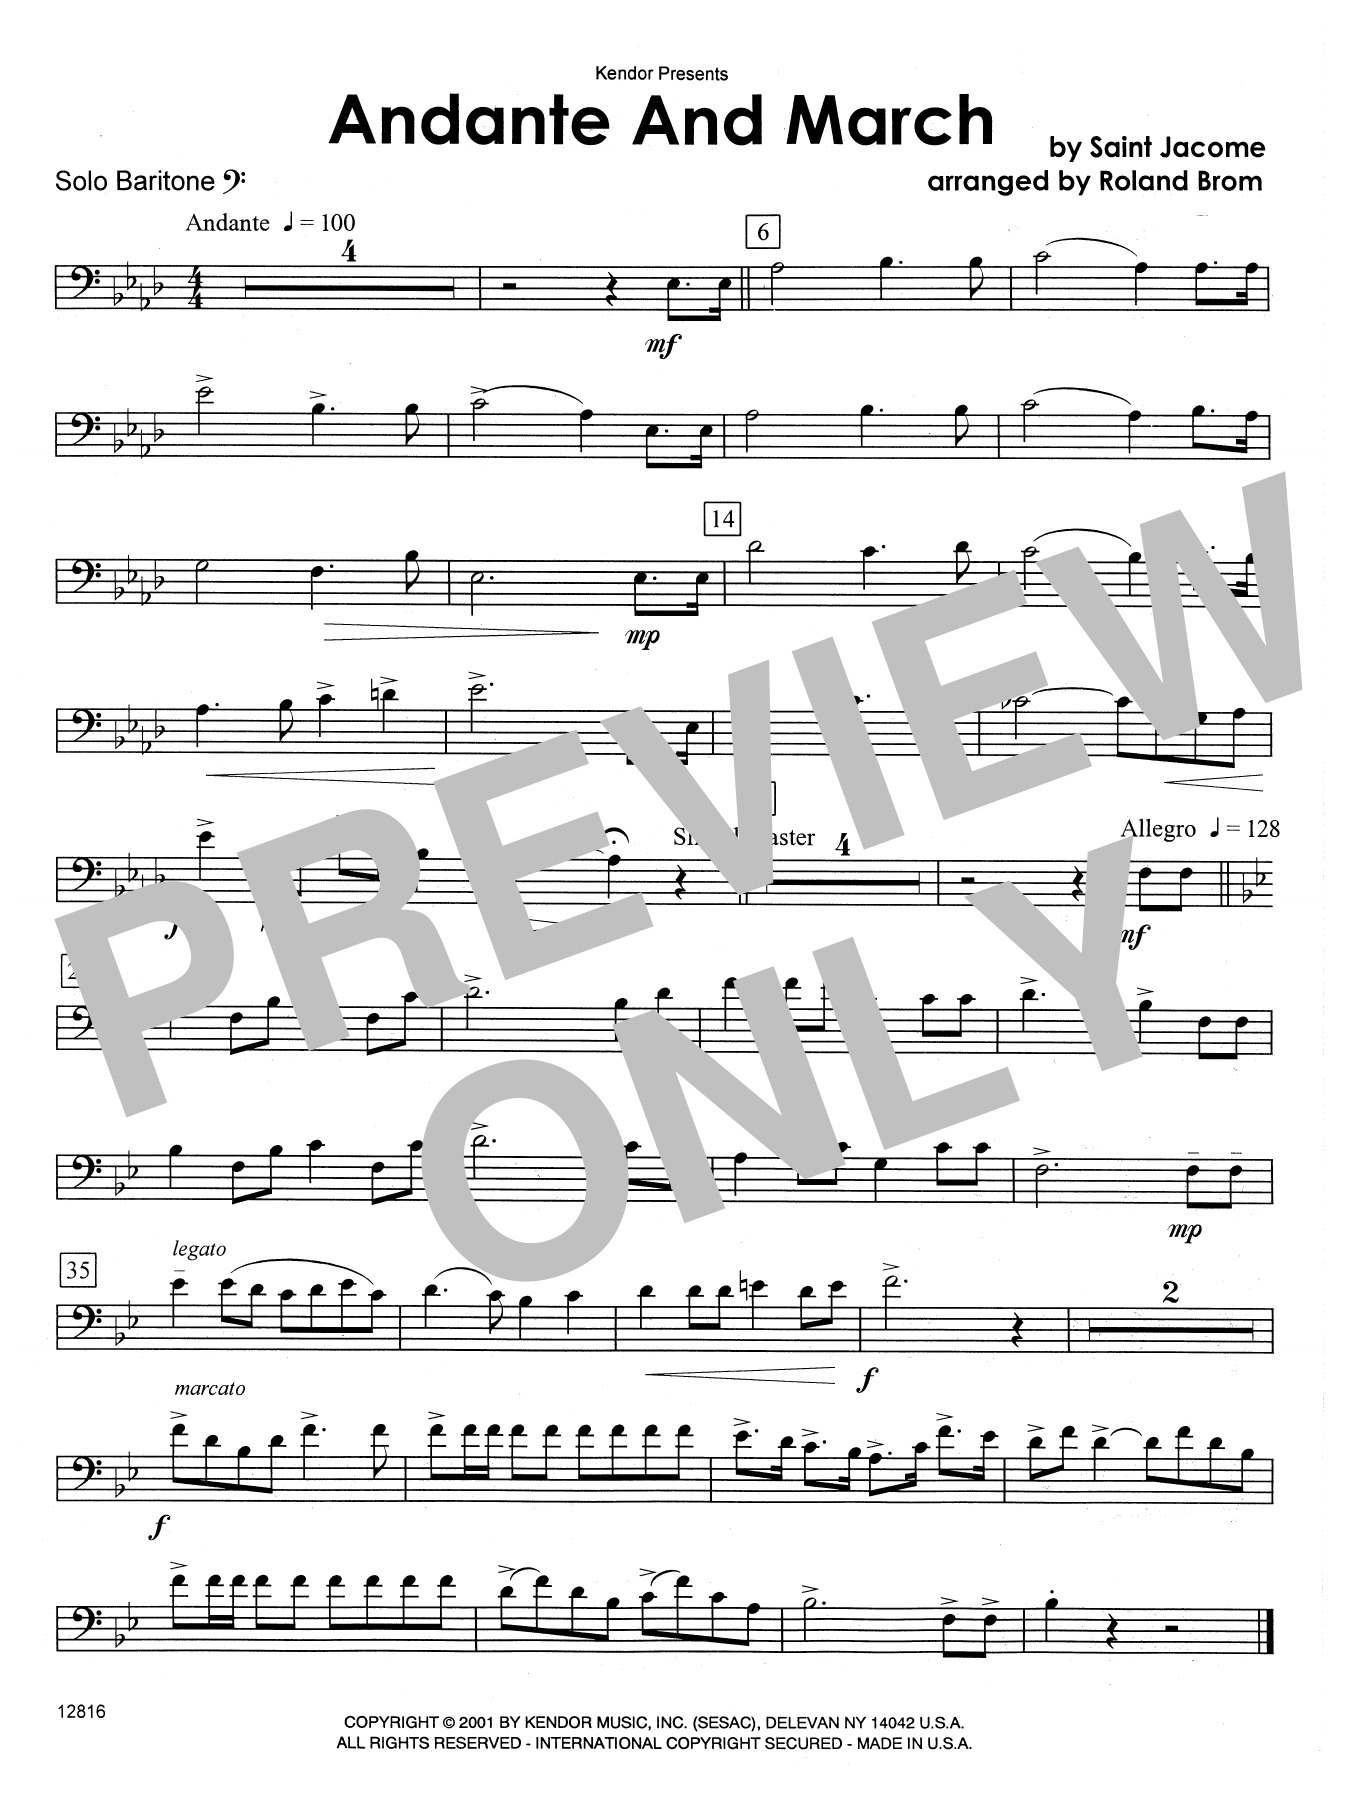 Download Brom Andante And March - Solo Baritone B.C. Sheet Music